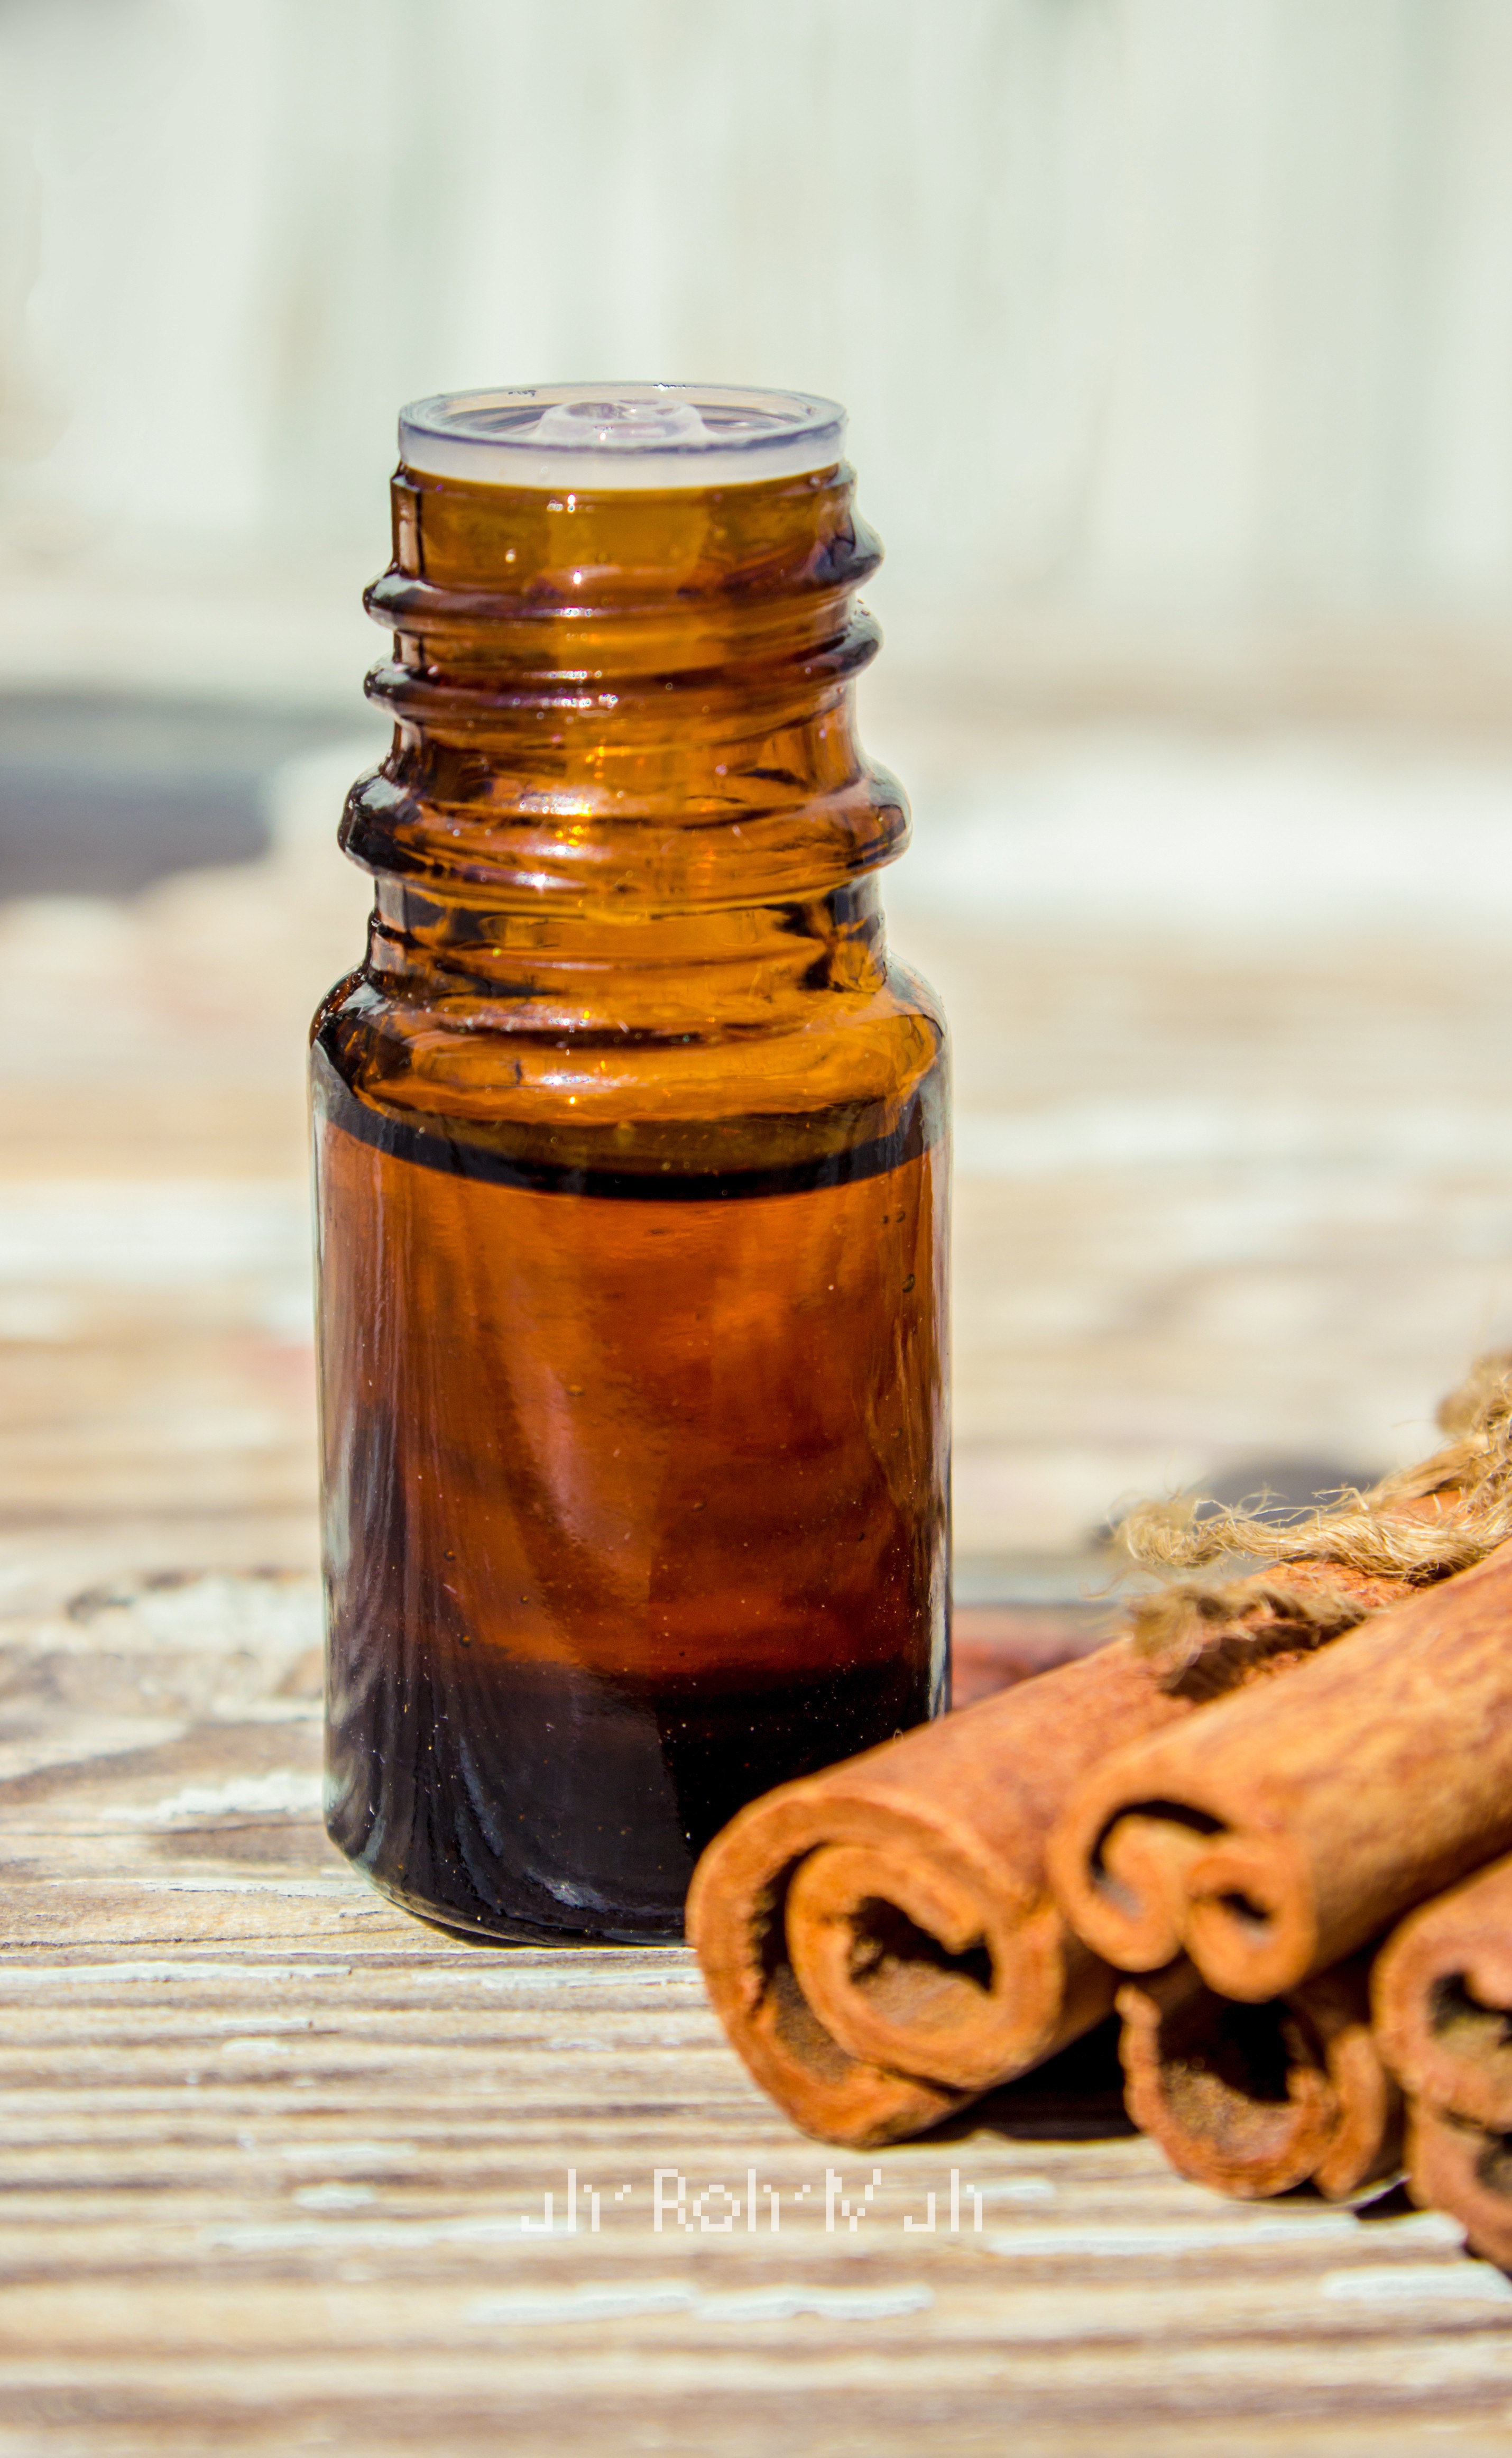 Looking for best quality and price on Cinnamon bark oil?